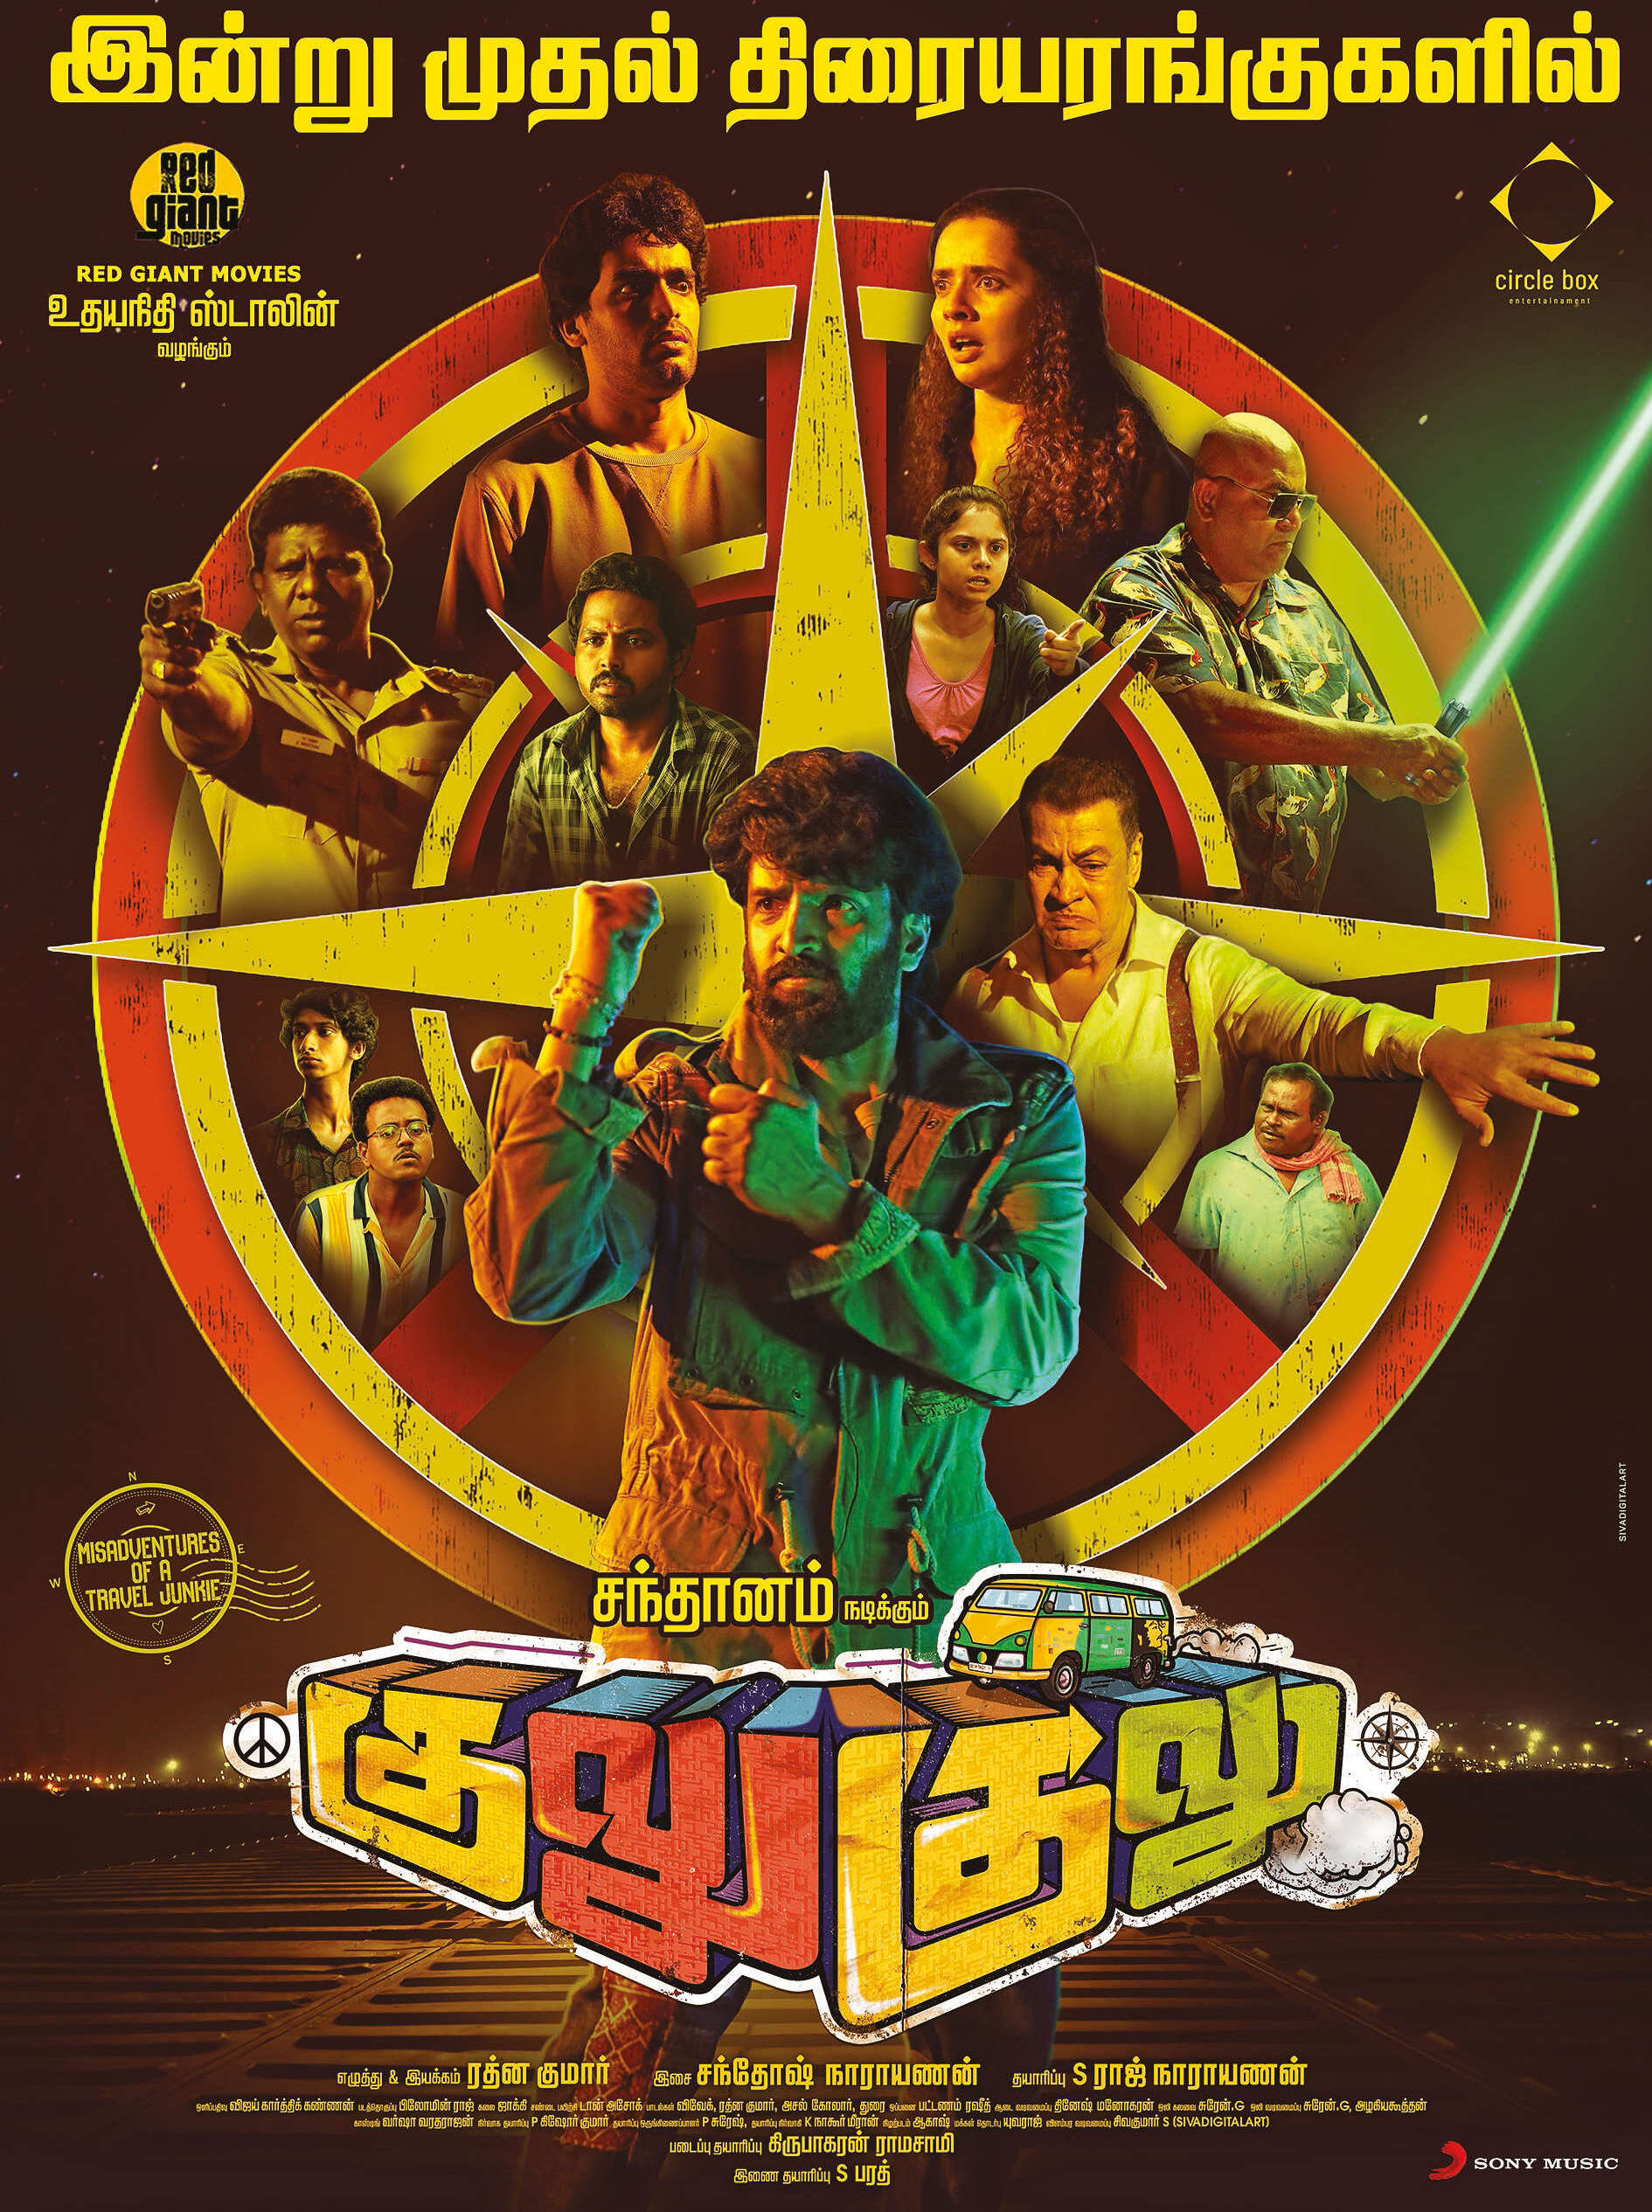 Gulu Gulu (2022) is tamil action comedy film directed by Rathna Kumar